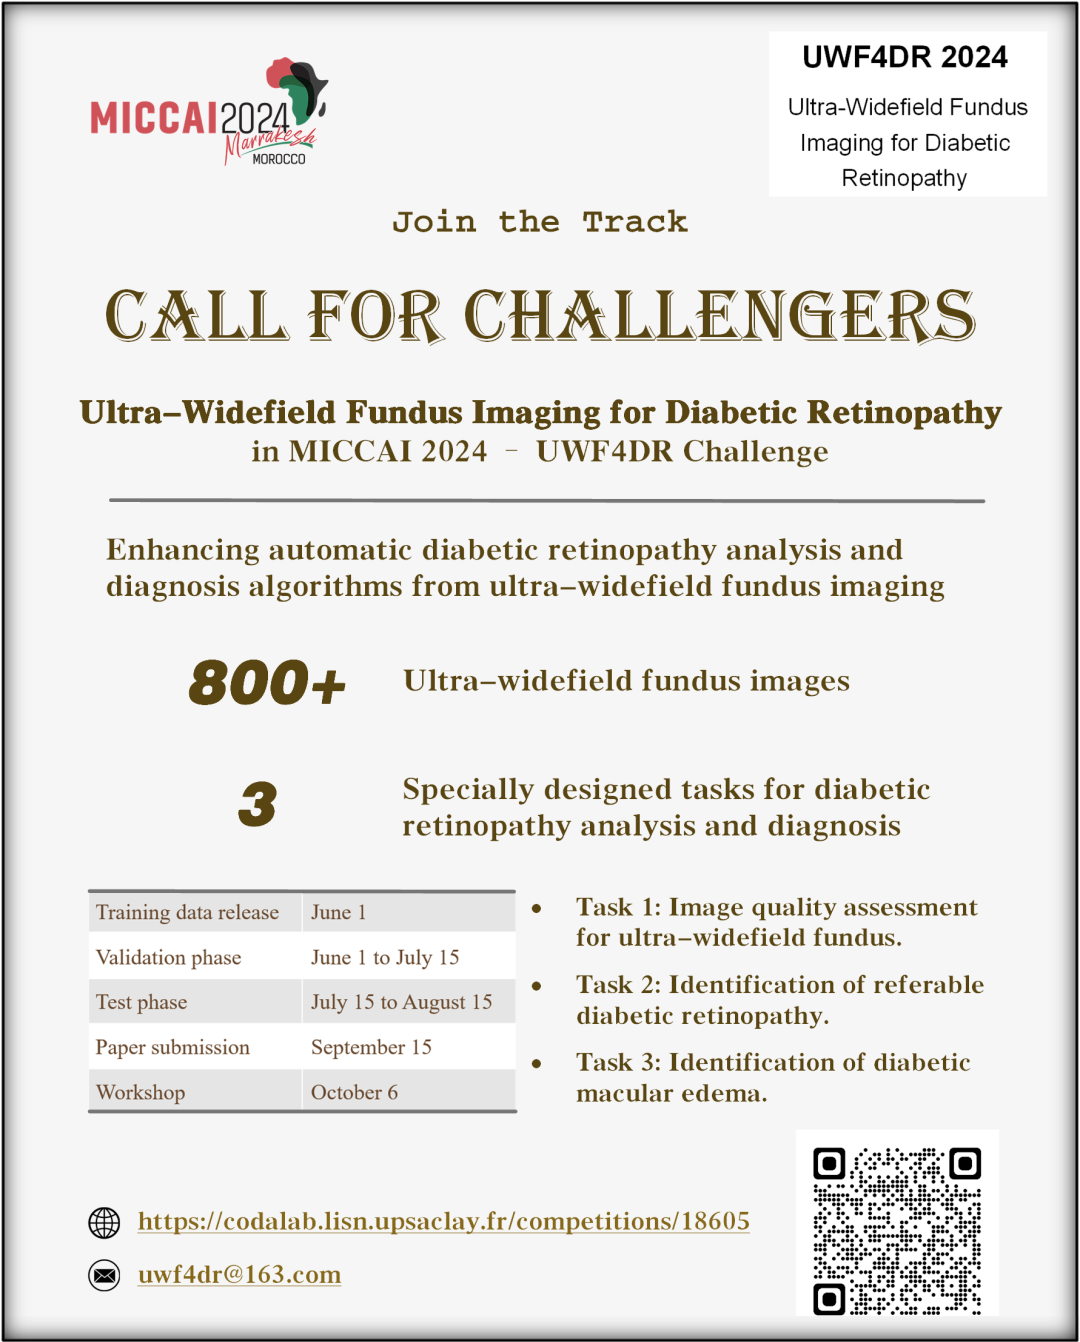 MICCAI UWF4DR 2024 Sub-track - Ultra-Widefield Fundus Imaging for Diabetic Retinopathy Challenge